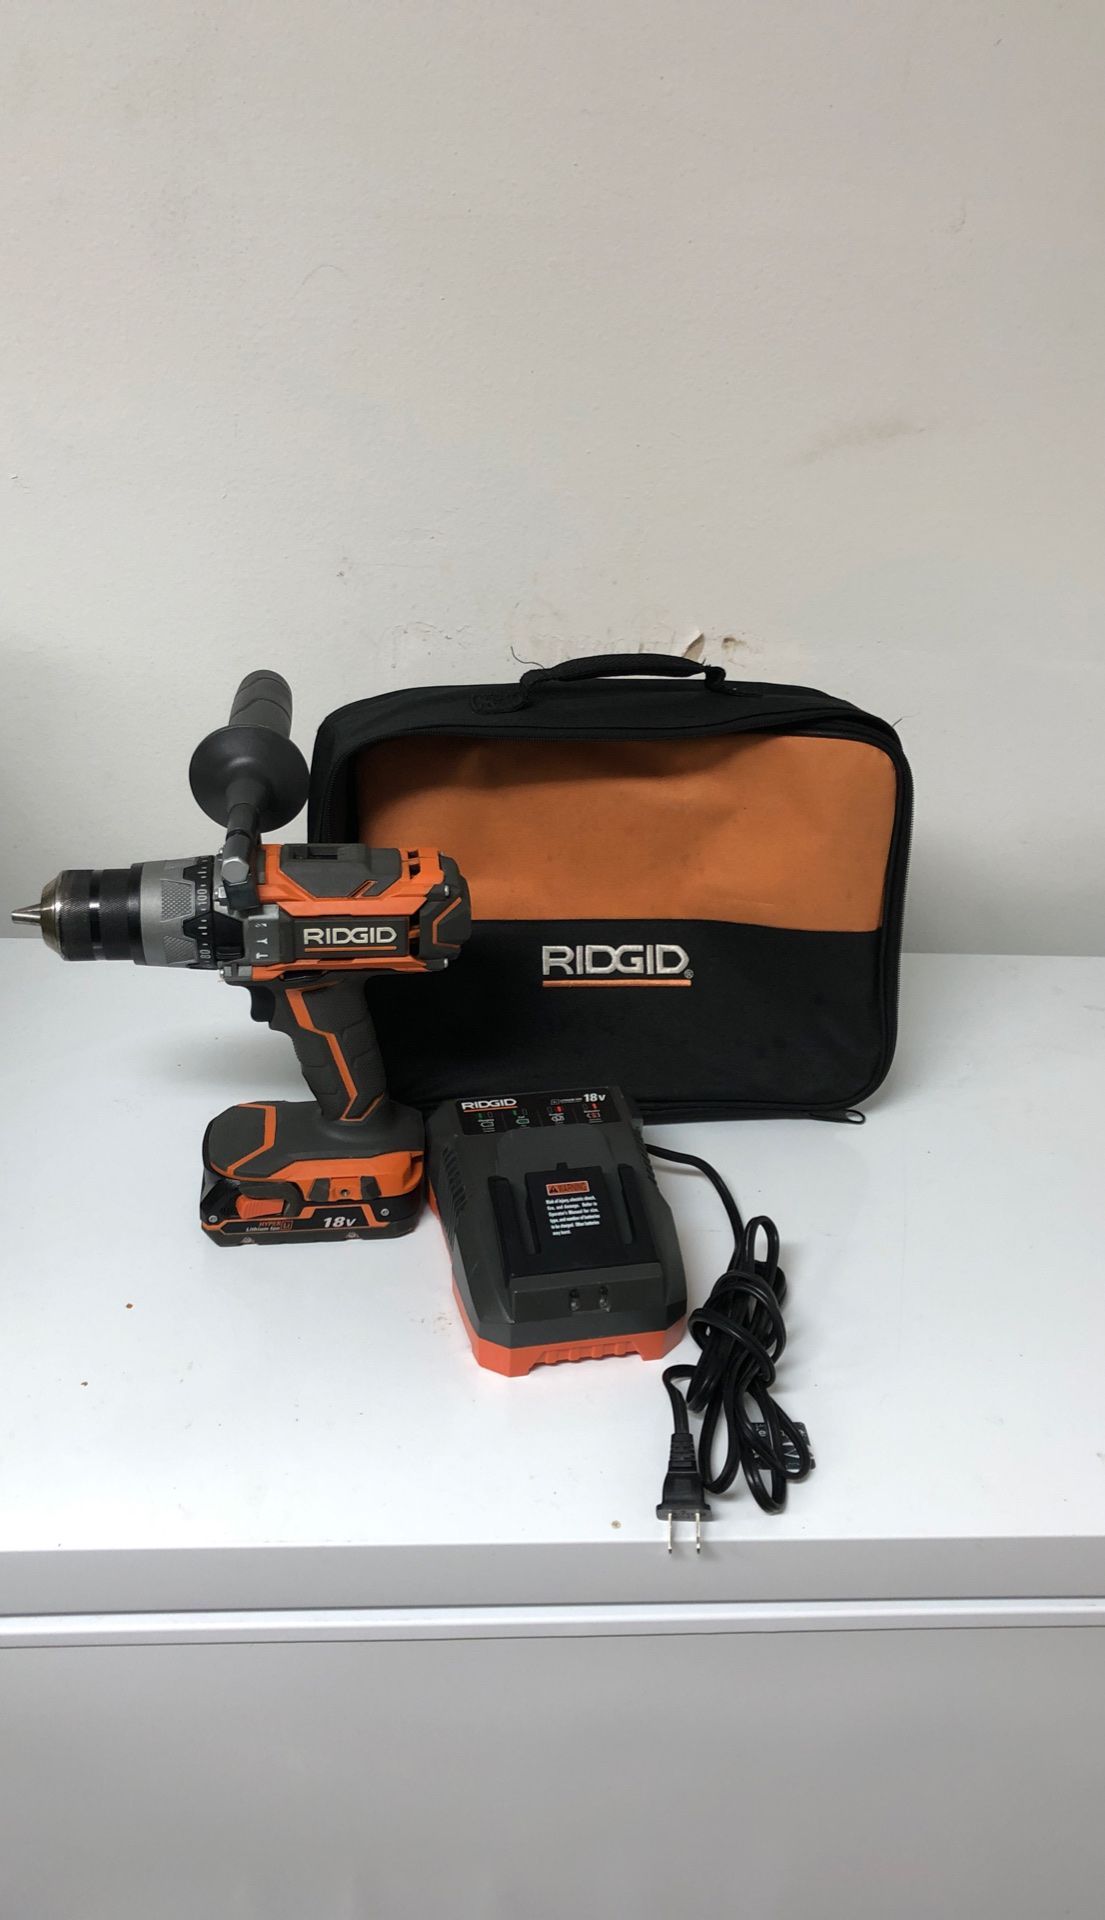 RIDGID 18-Volt Lithium-Ion Cordless Brushless 1/2 in. Compact Hammer Drill Kit with one 2.0 Ah Battery, Charger, and Bag